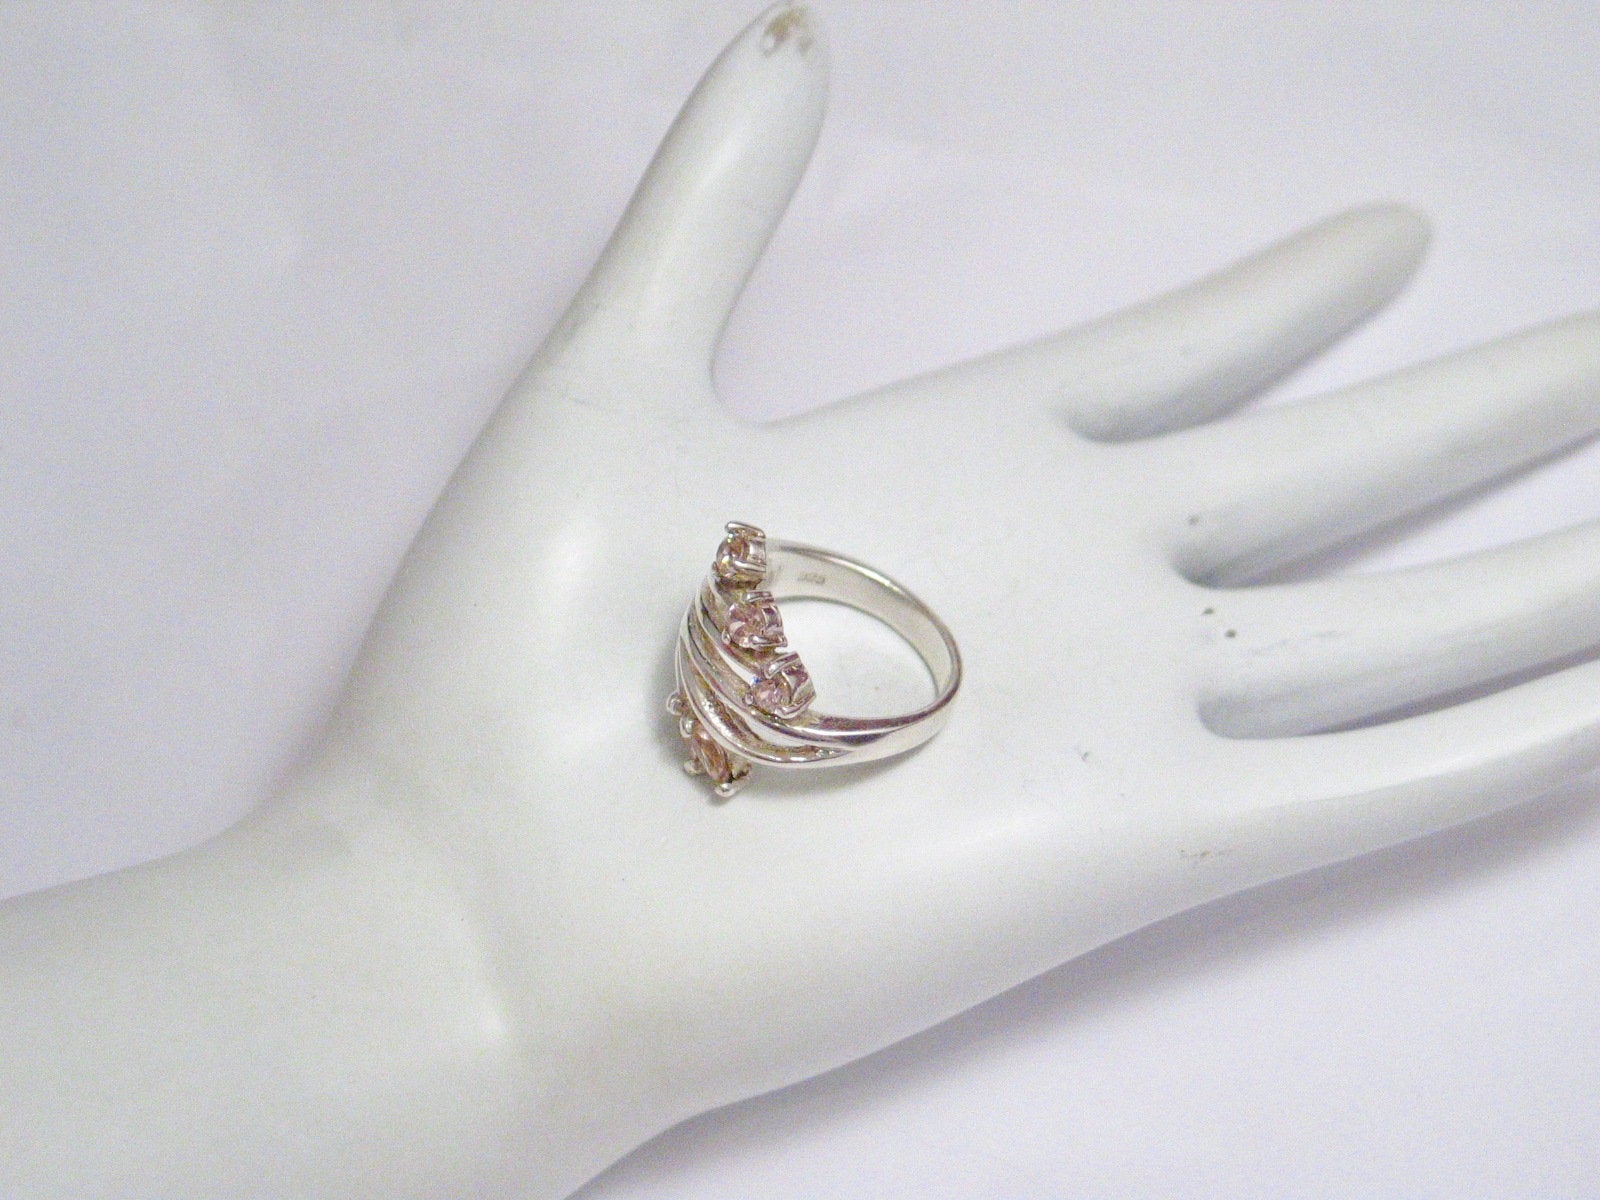 Statement Ring, Beautiful Wide Sterling Silver Pink Stone Spray Design Cocktail Ring